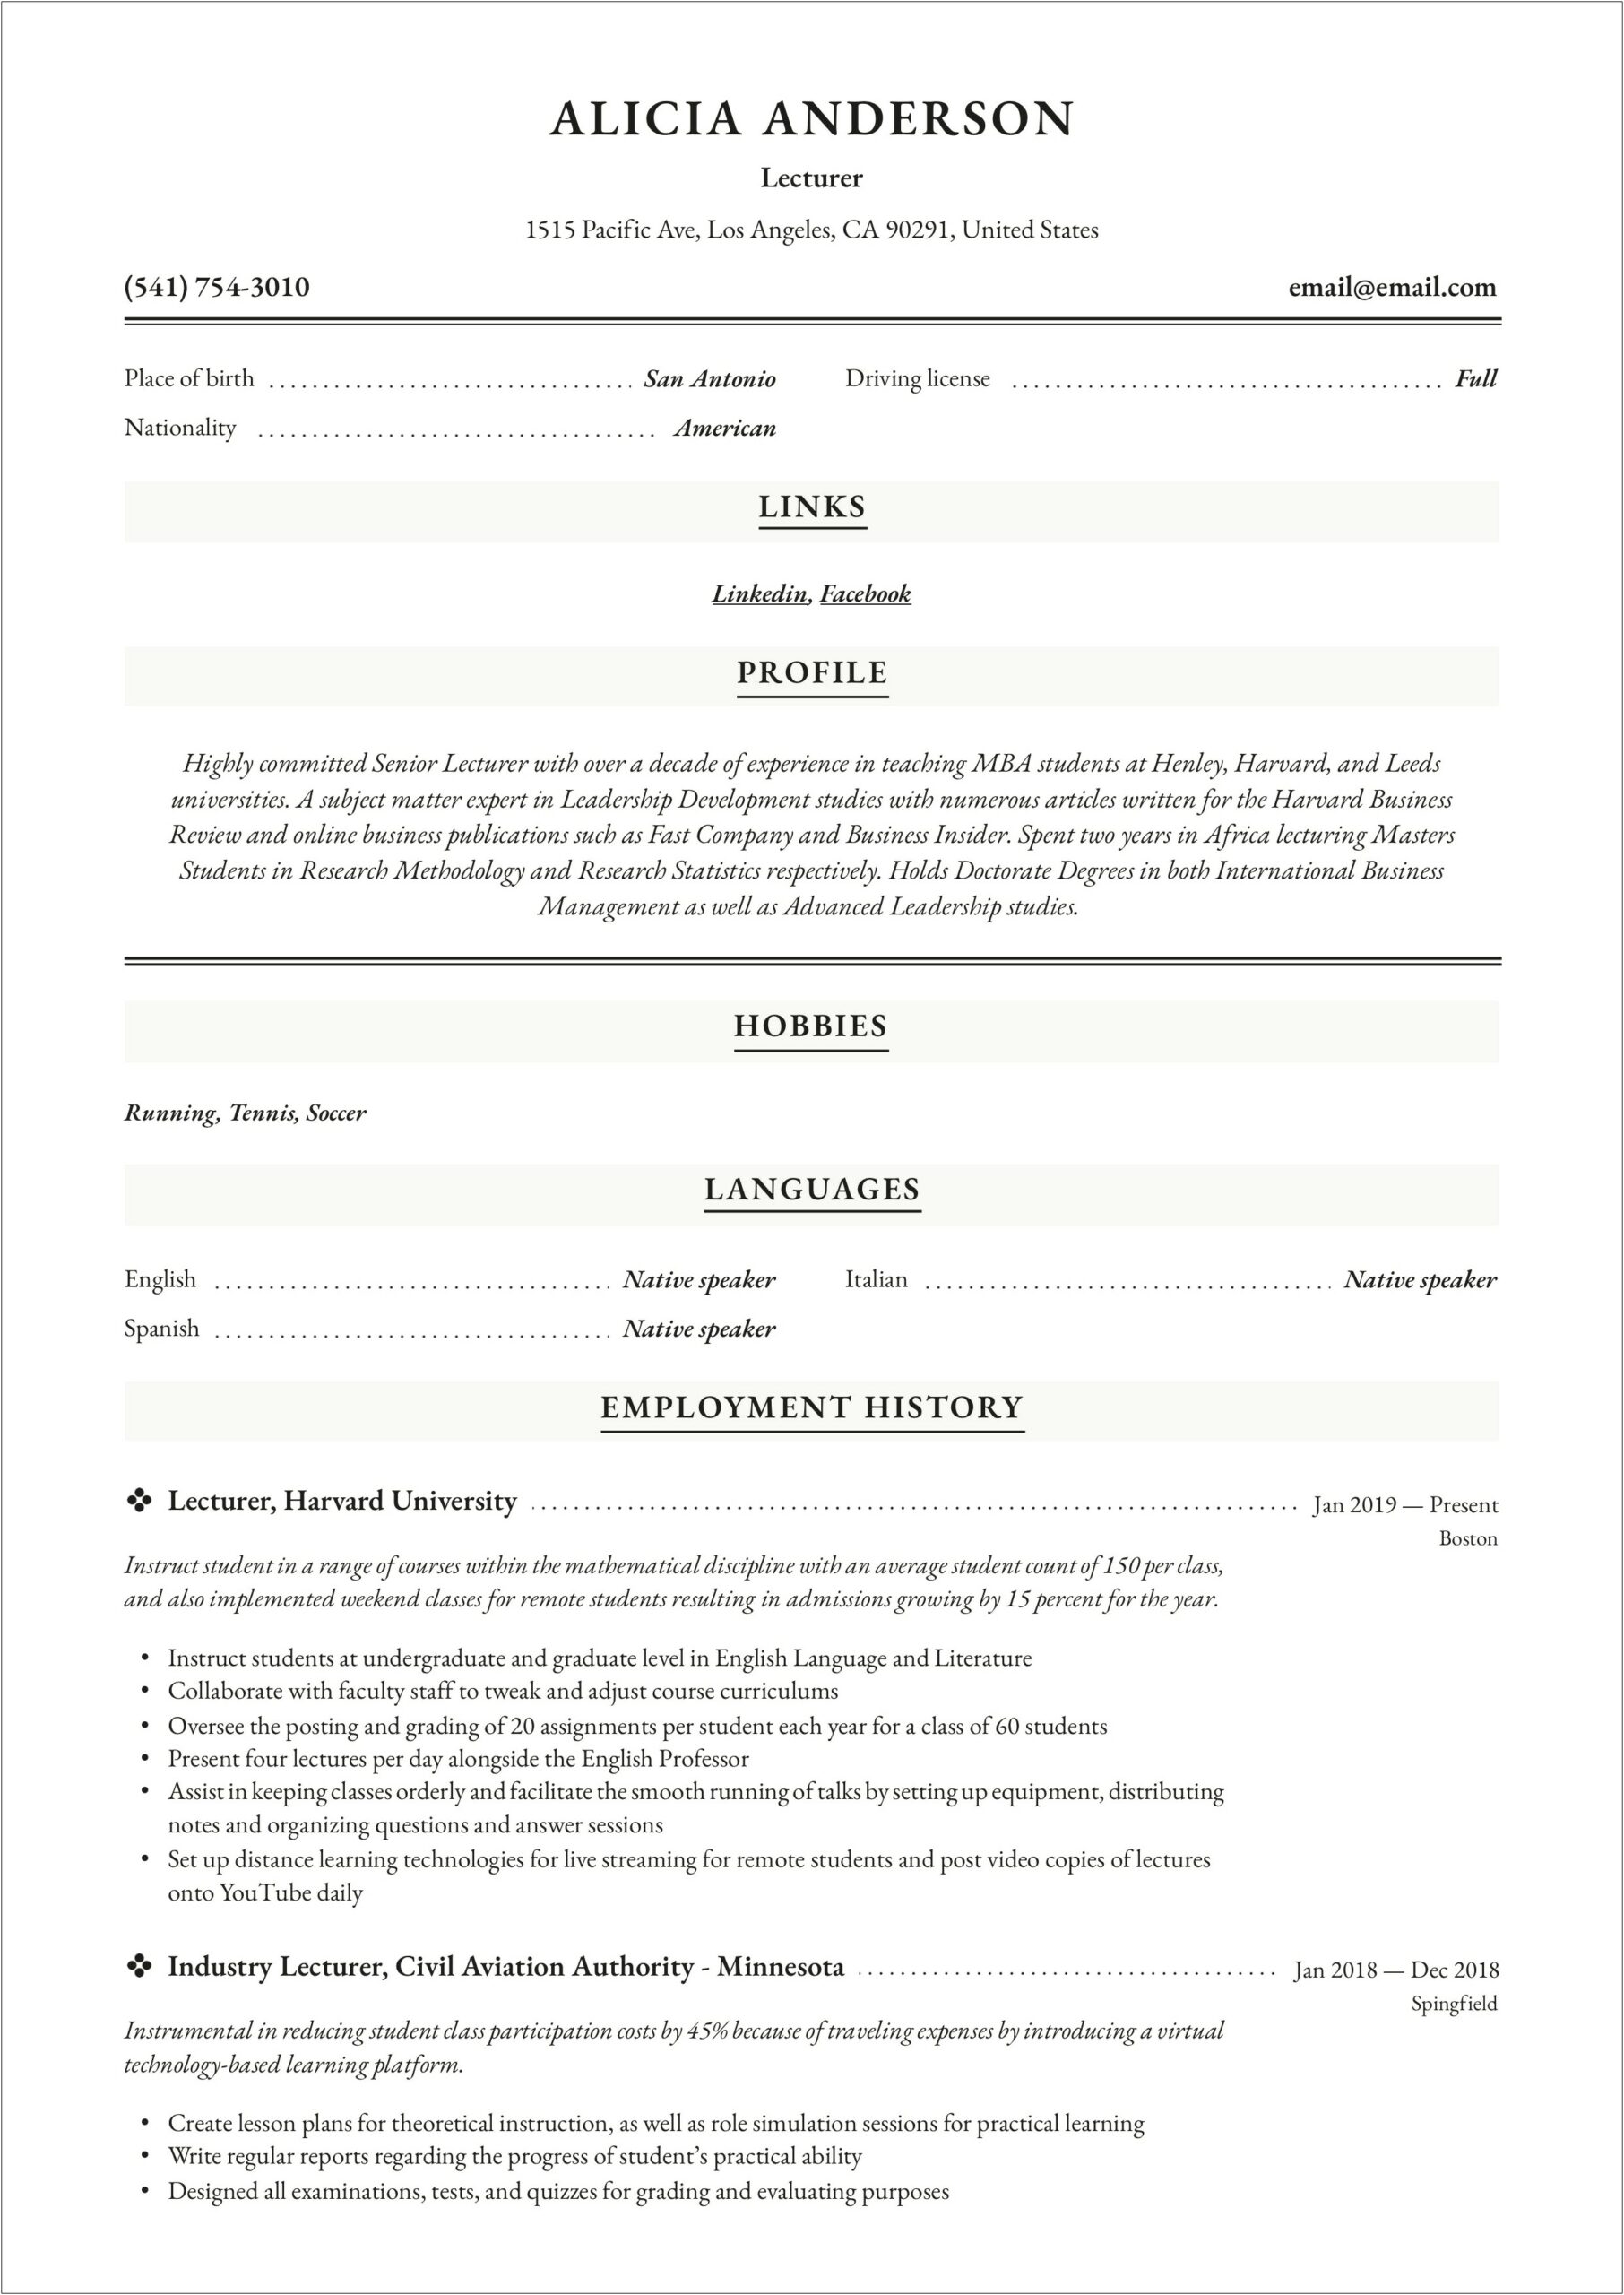 Resume Samples For Conducting Psychology Tests